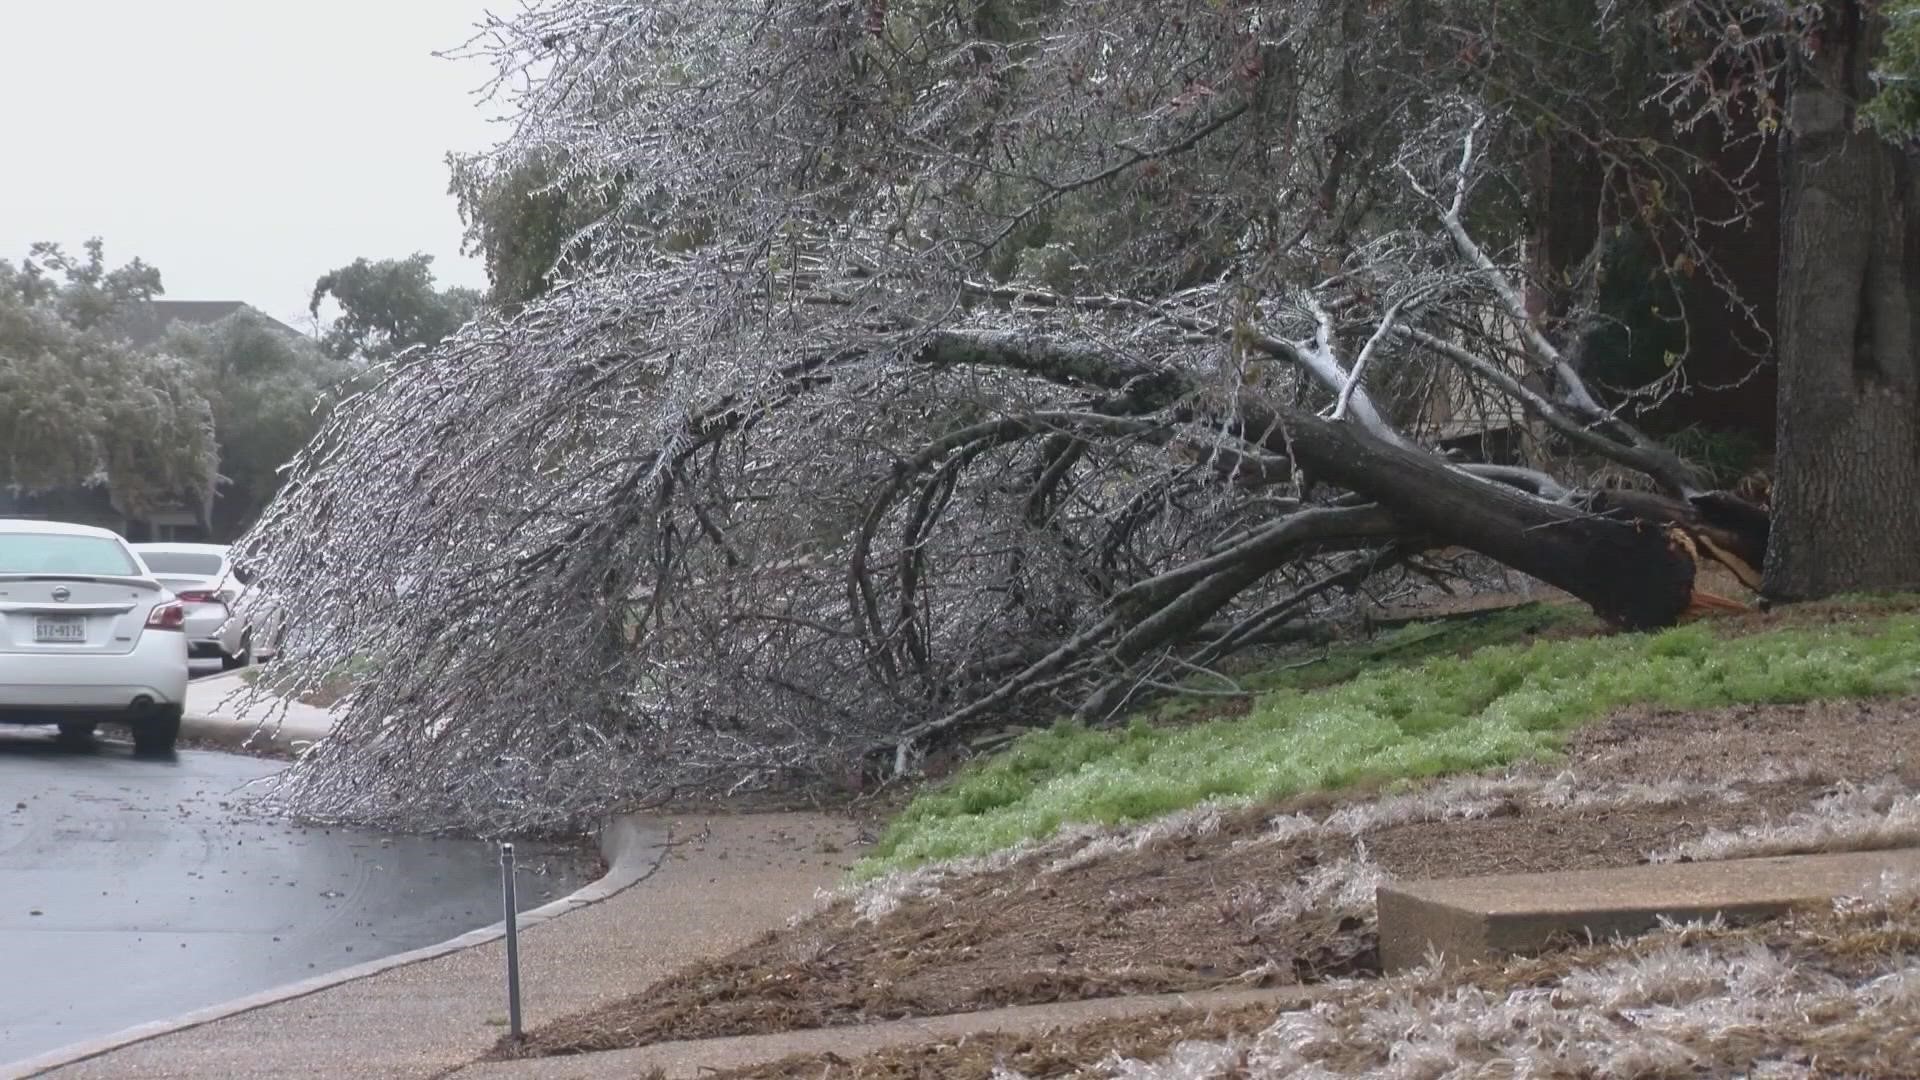 Here's what you should do if you have to file an insurance claim following the winter storm.